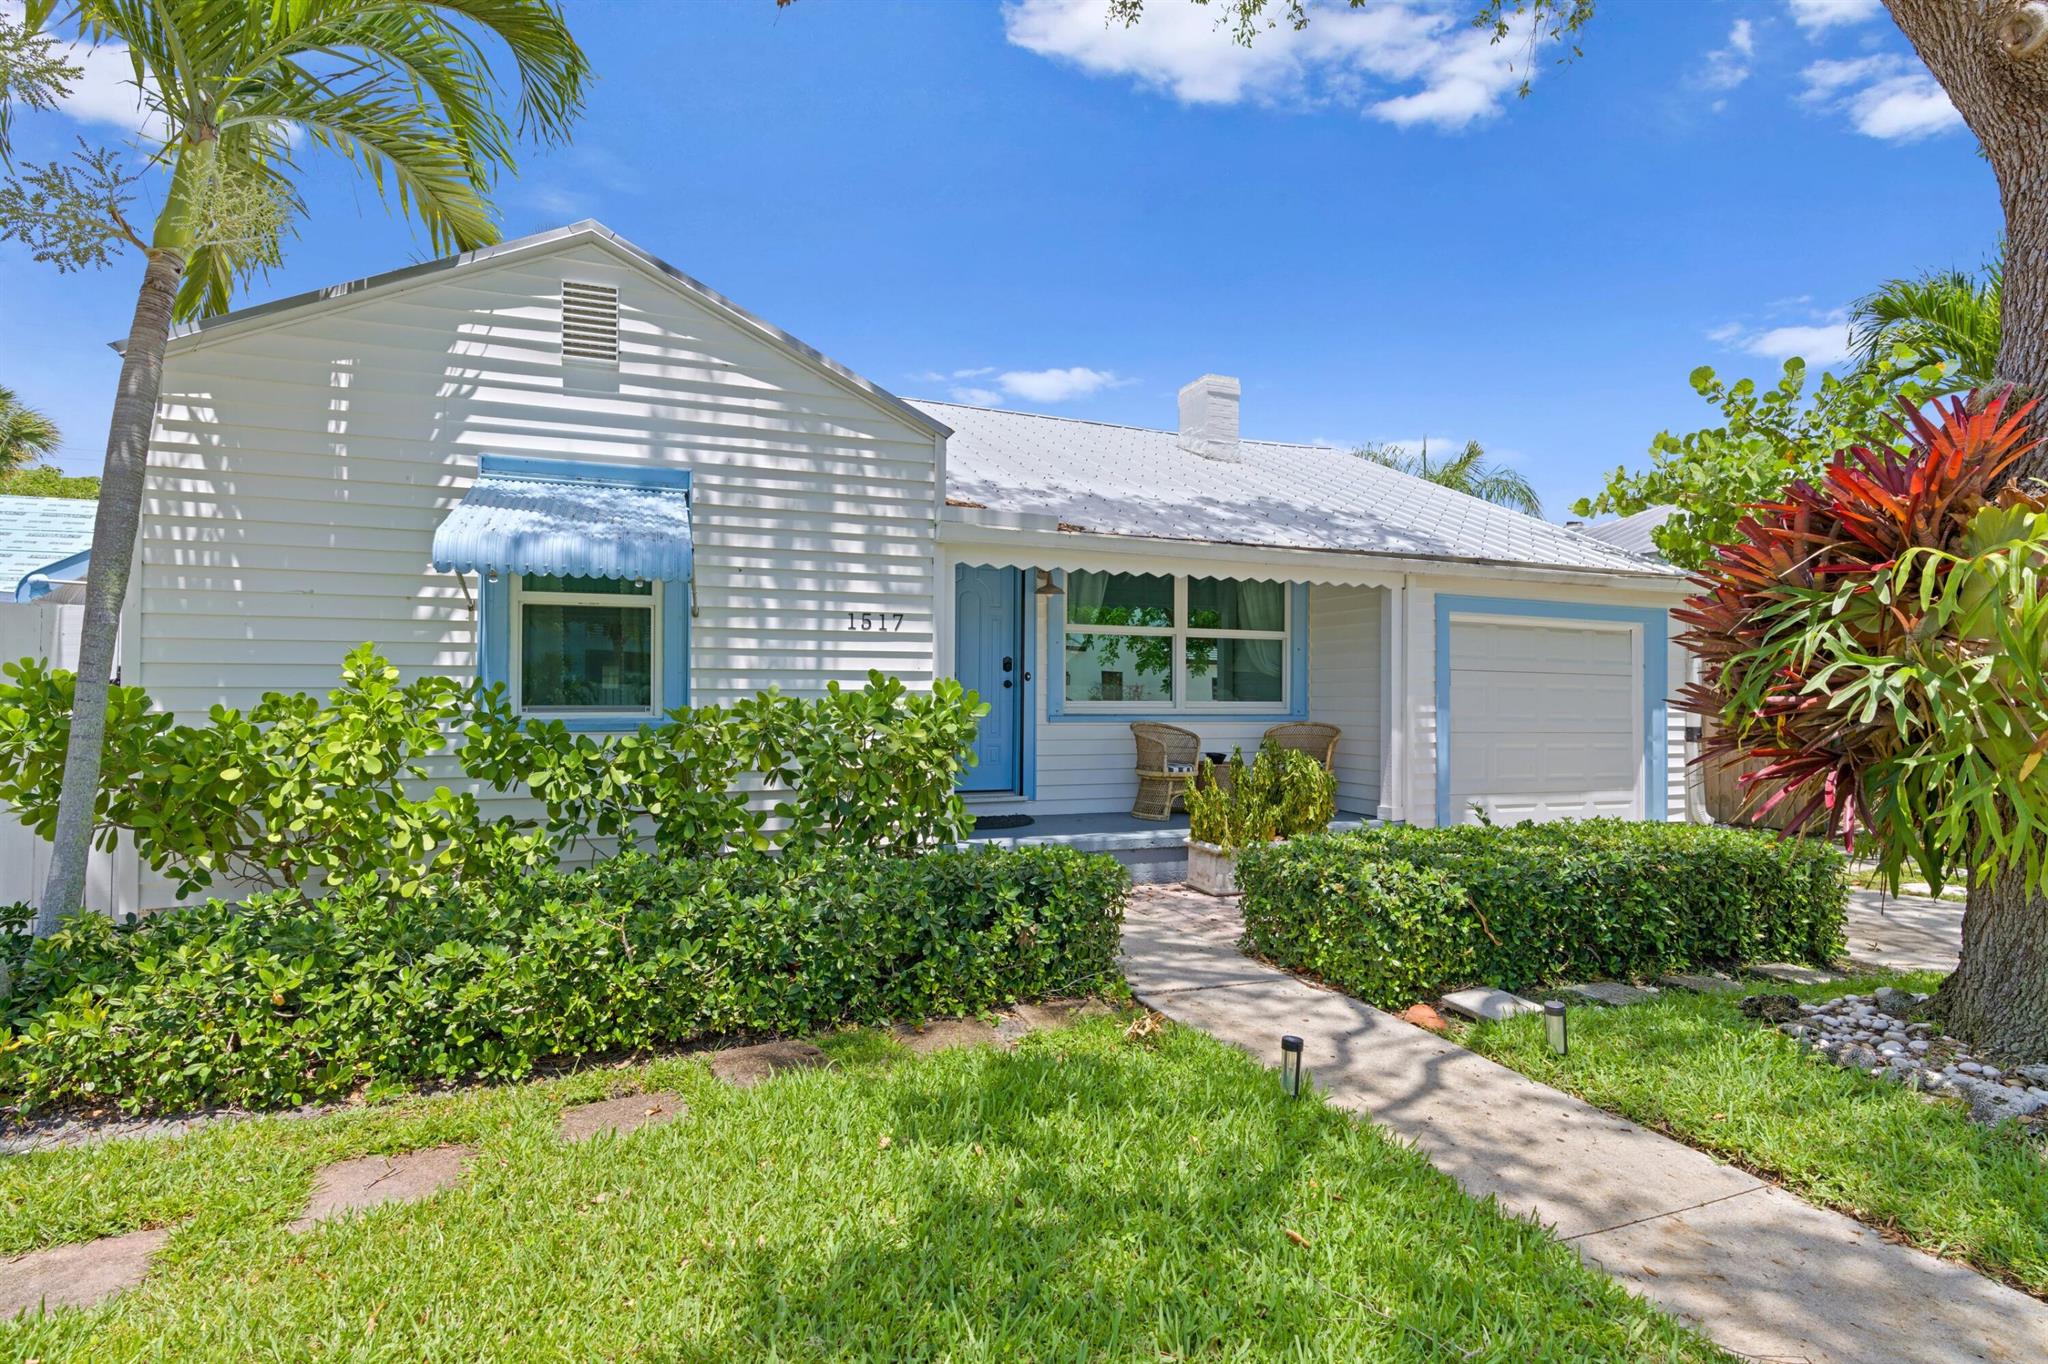 Adorable Florida Style Cottage on North Palmway in Lake Worth Beach. Updated kitchen and baths, original oak hardwood flooring, fireplace, and original plaster walls. All impact glass doors, and windows, and a metal roof. The lot os 5000 sq. ft. with room for a pool, and nicely landscaped. The back patio is all reclaimed brick pavers, fenced and gated. The garage is now a half garage used for storage, this area is not on the floor plan. The 2nd bath has the laundry inside for added convenience. 16th Avenue North has the north entrance to the golf course for walking etc. The electric has been updated, and the home is in move-in-condition. The home can be purchased turn-key furnished, adding a great short term rental option. The storage garage is not shown on the floor plan, a 1/2 garage.